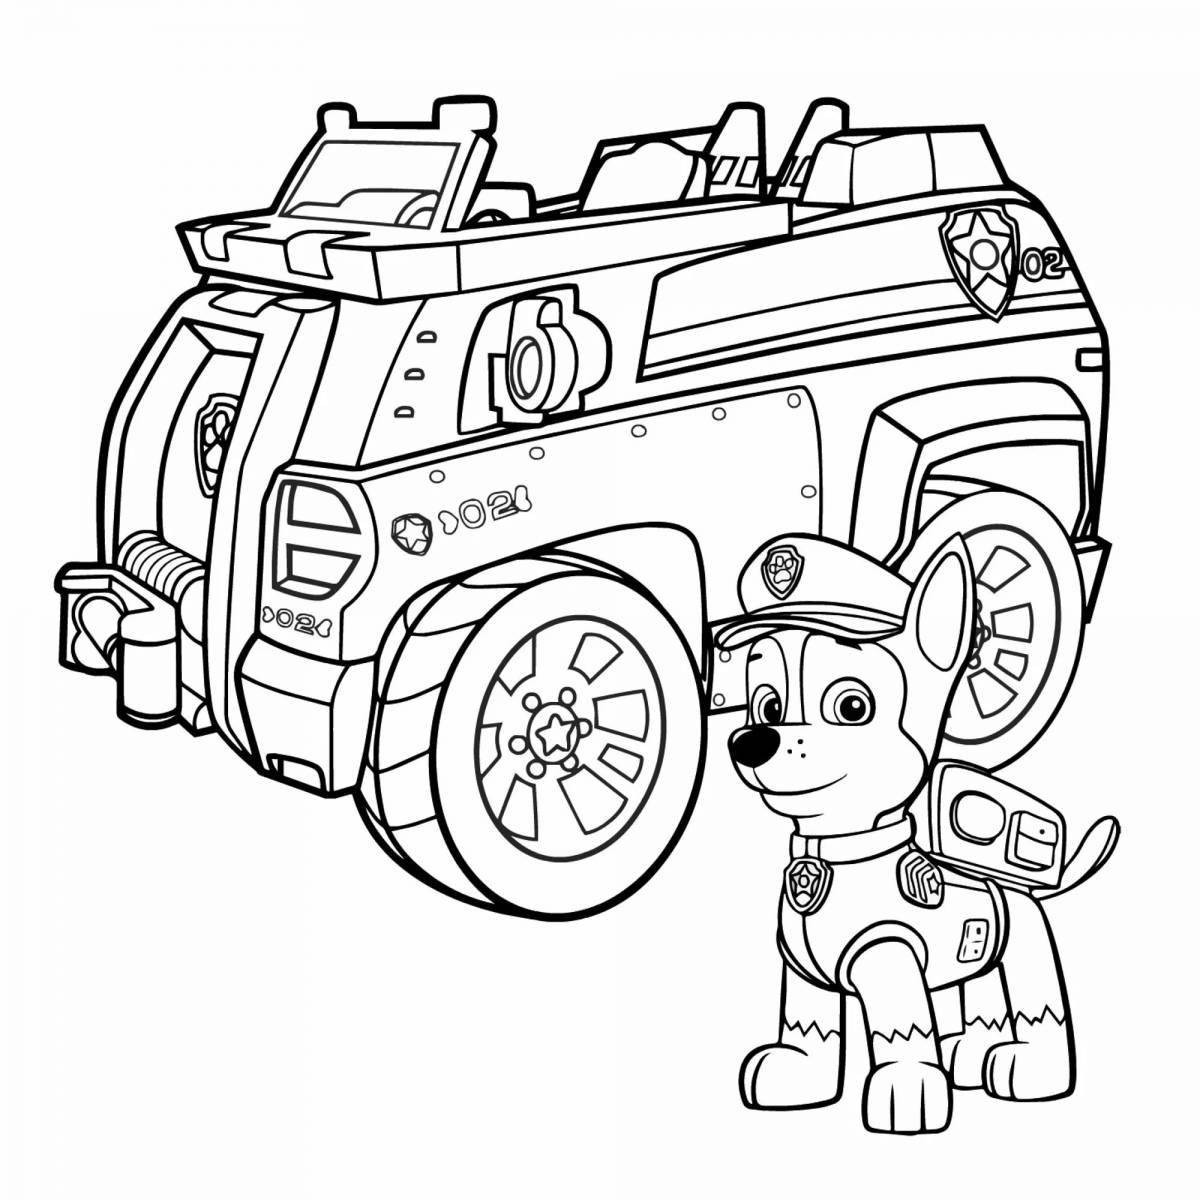 Paw Patrol coloring book for 5 year olds